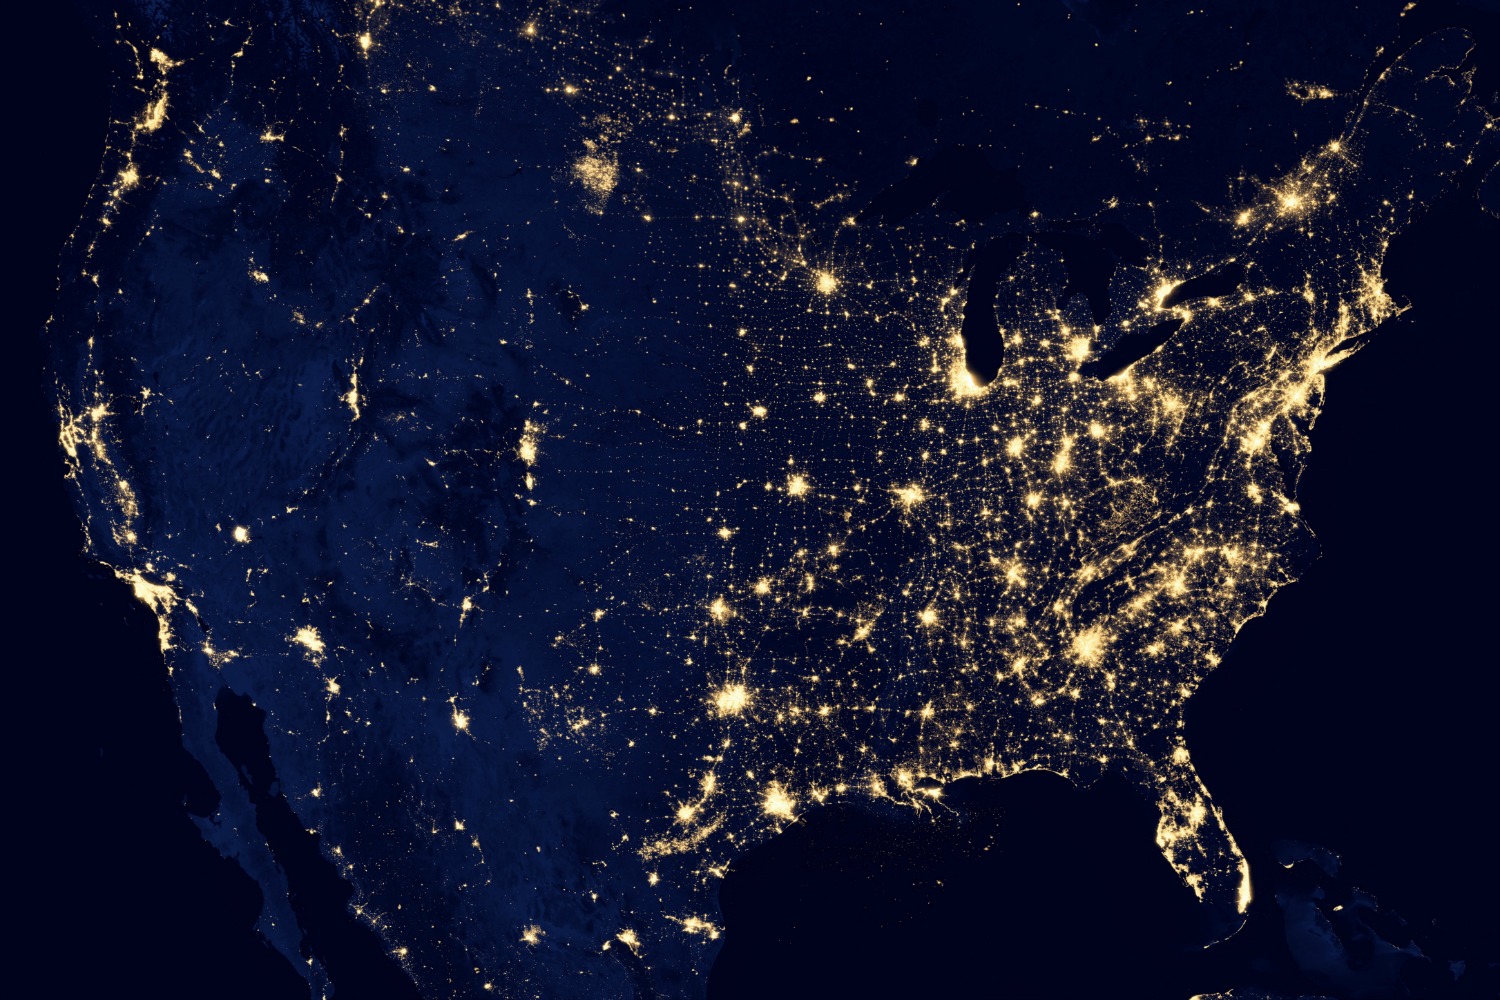 united states arial photo at night